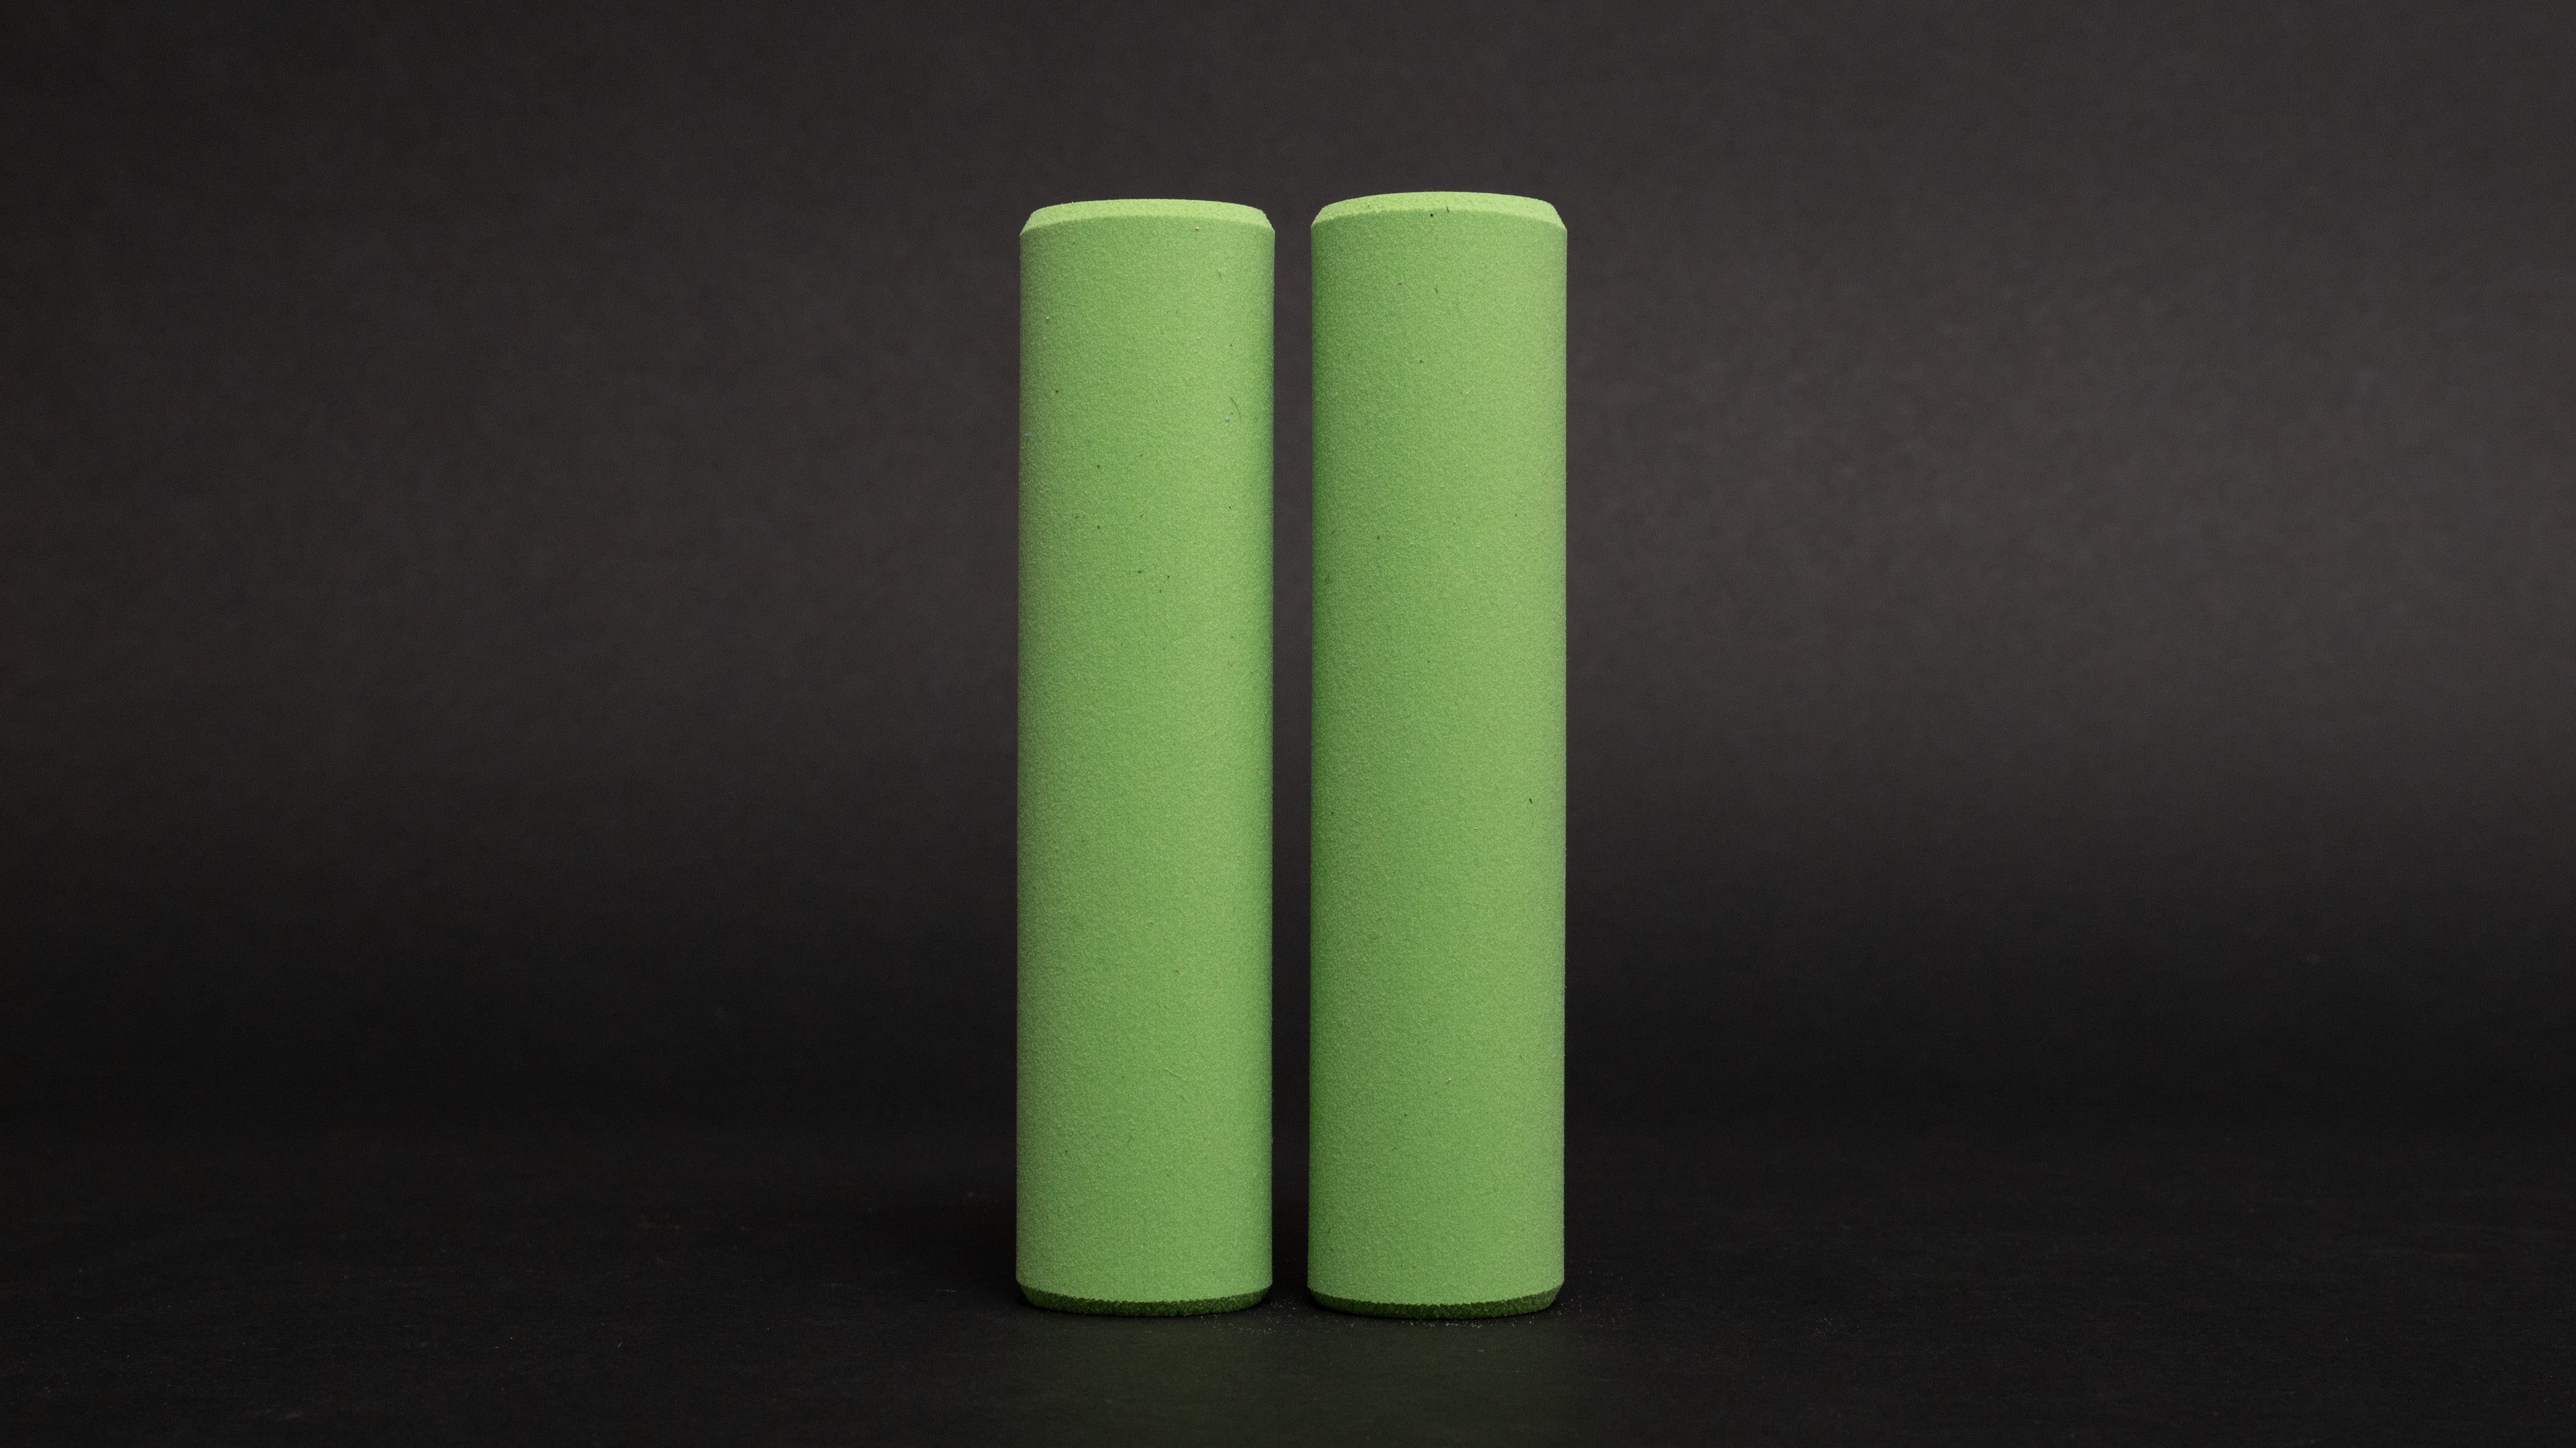 Silicone Grips - Buy Silicone Foam Grips, Foam Grips, grips Product on The  Best BIKE Accessories You Can Buy Right Now!